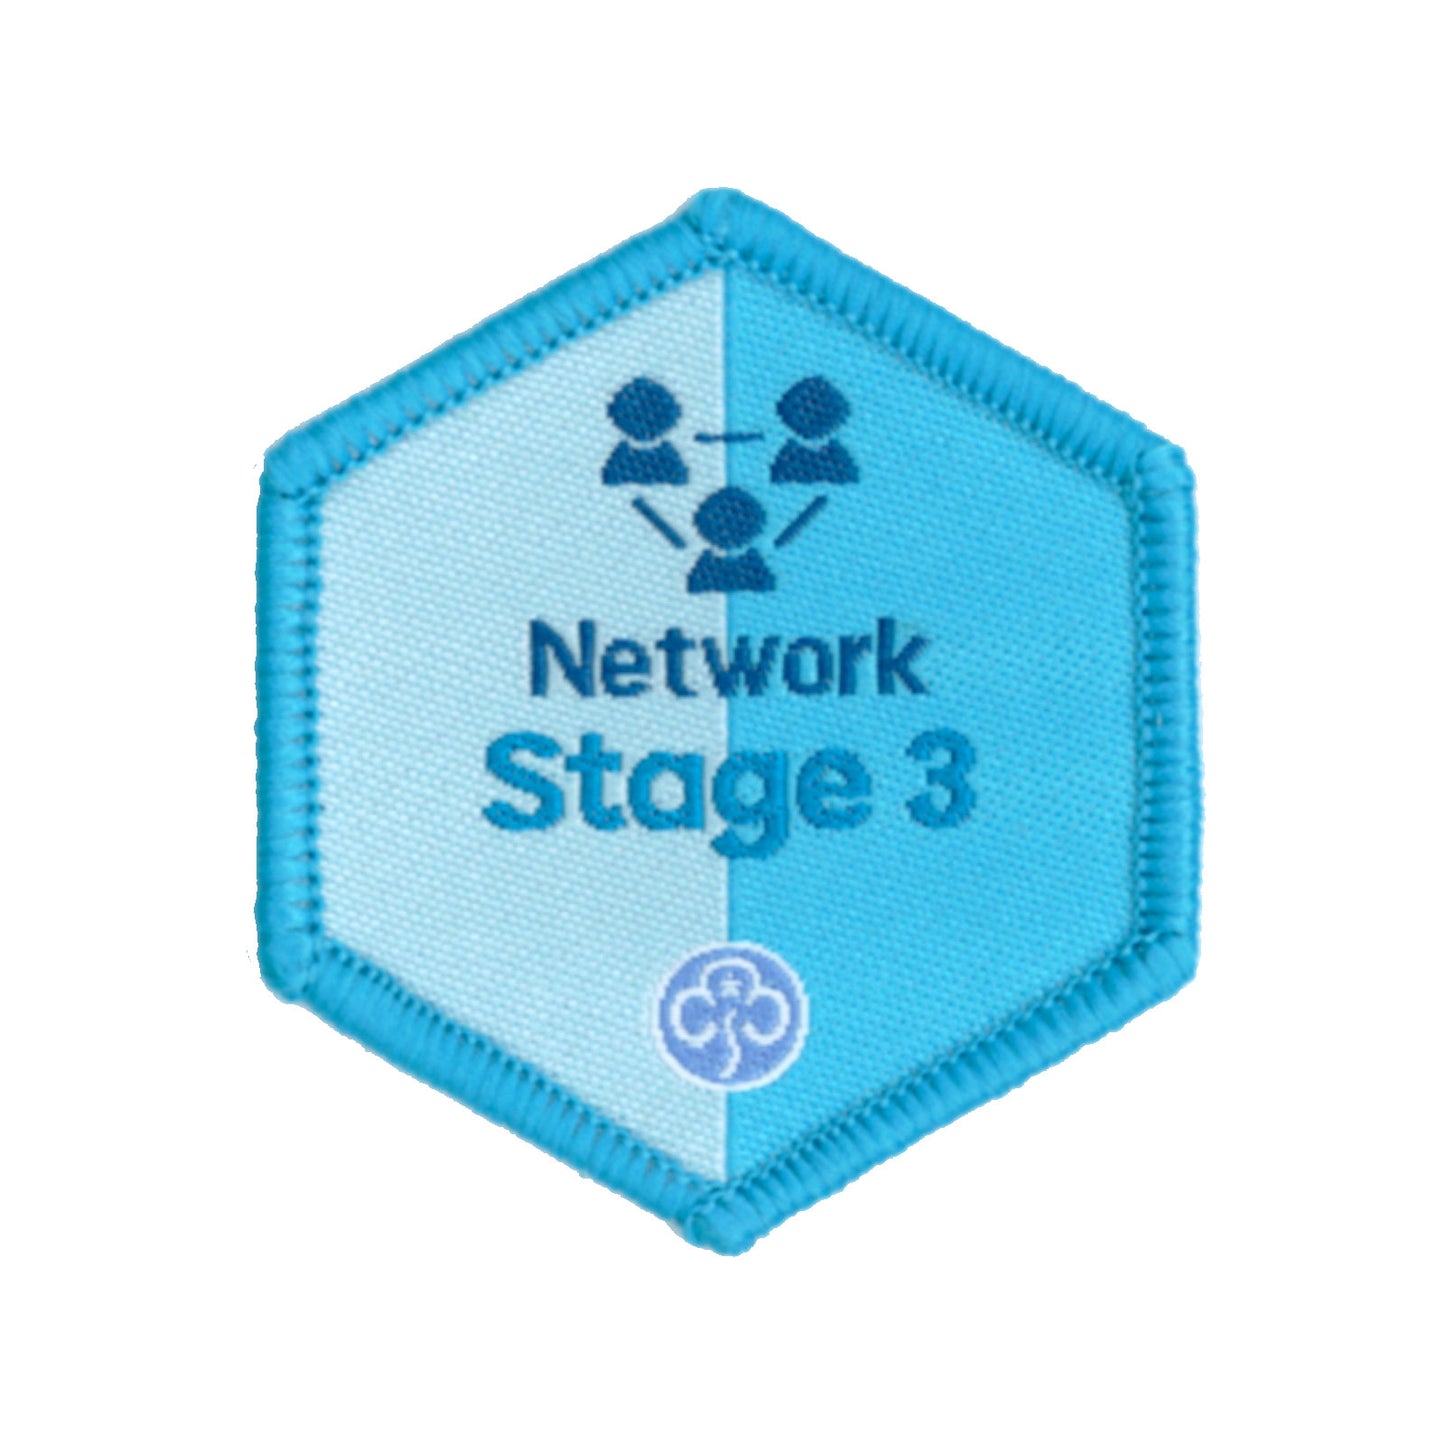 Skills Builder - Know Myself - Network Stage 3 Woven Badge